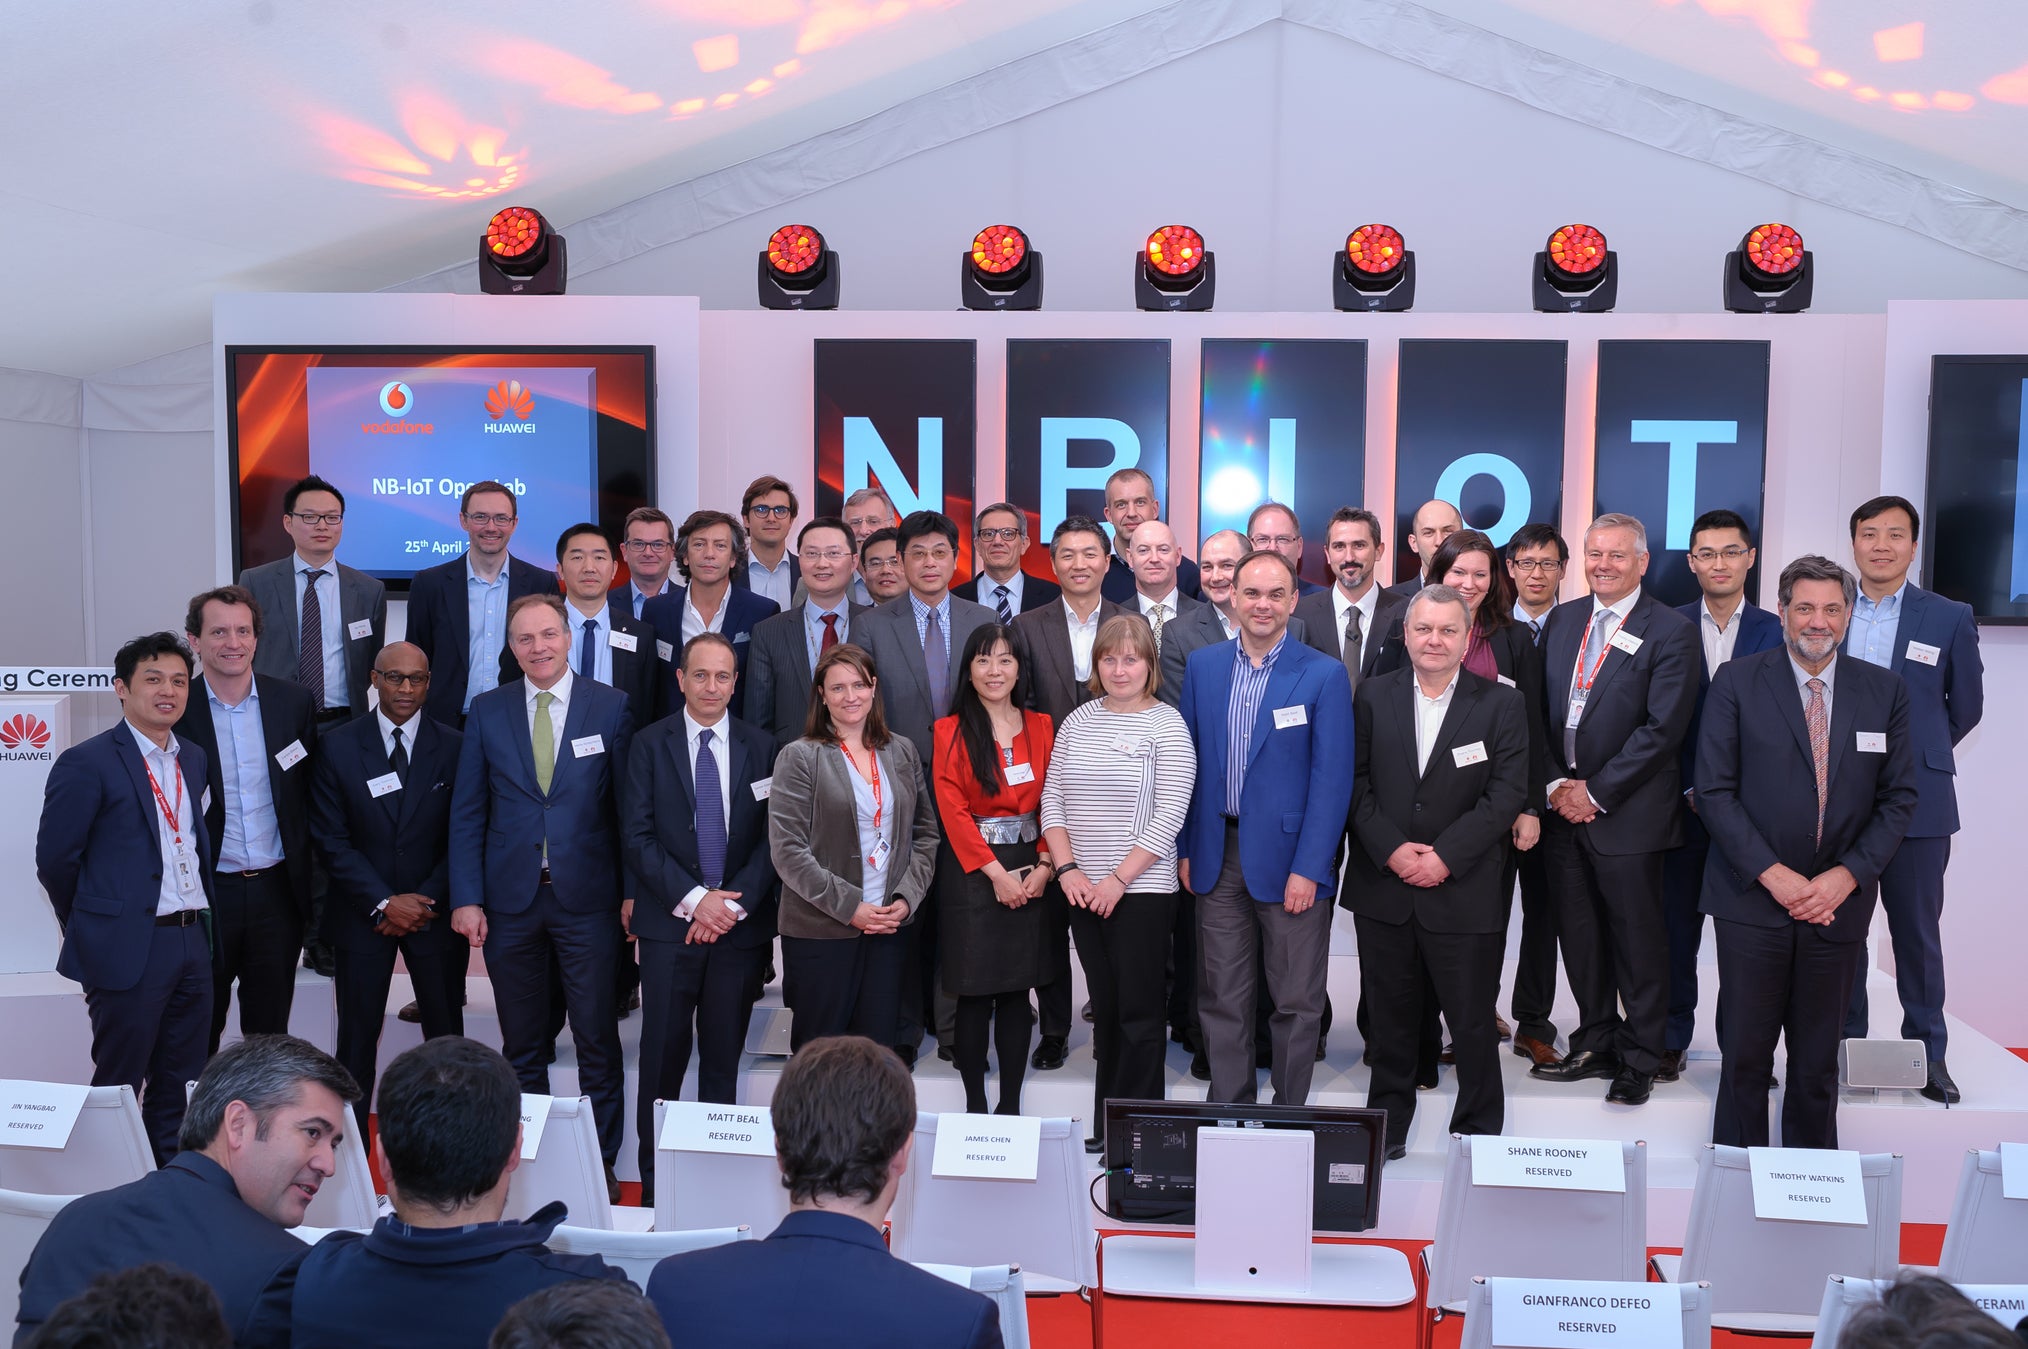 Huawei, Vodafone open world’s first narrowband IoT open lab